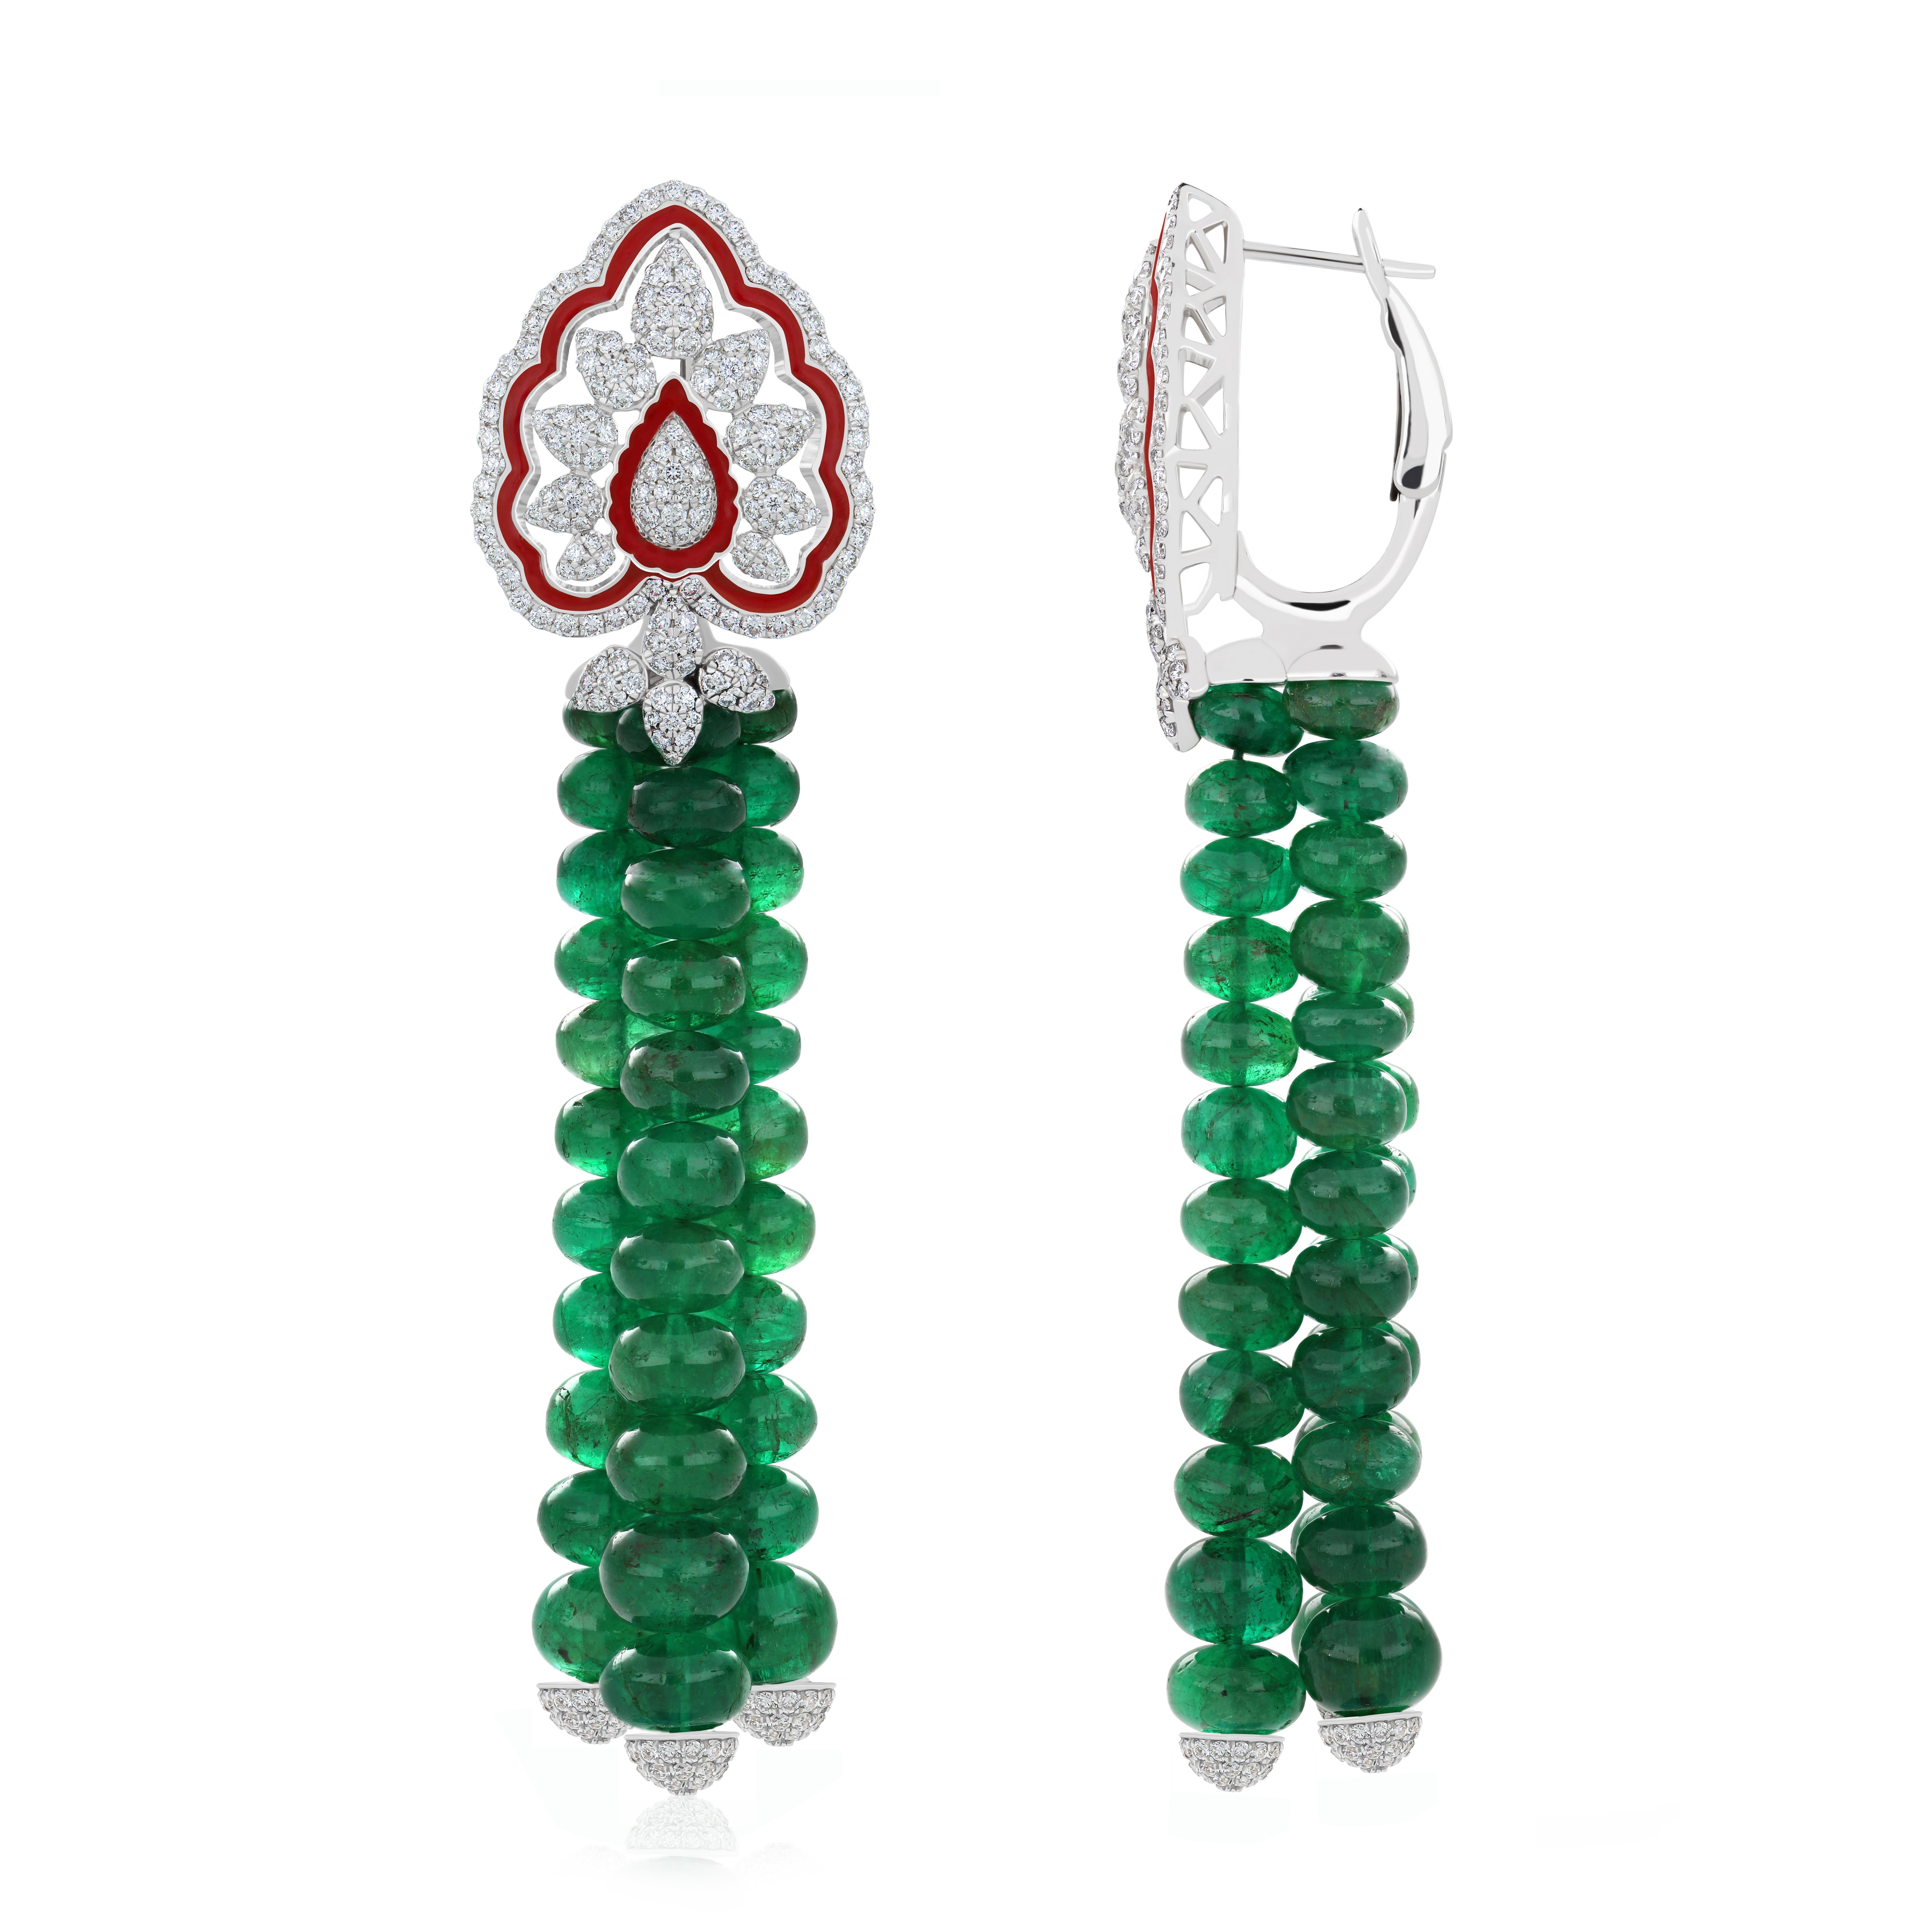 Elegant and Exquisitely Detailed 18 Karat White Gold Earring. Set with Bead Emerald with approx. 109.6 Cts, accented with micro pave set Diamond with approx.  3.0 Cts, Further enhanced with contrasting Red Color enamel to bring out their character.